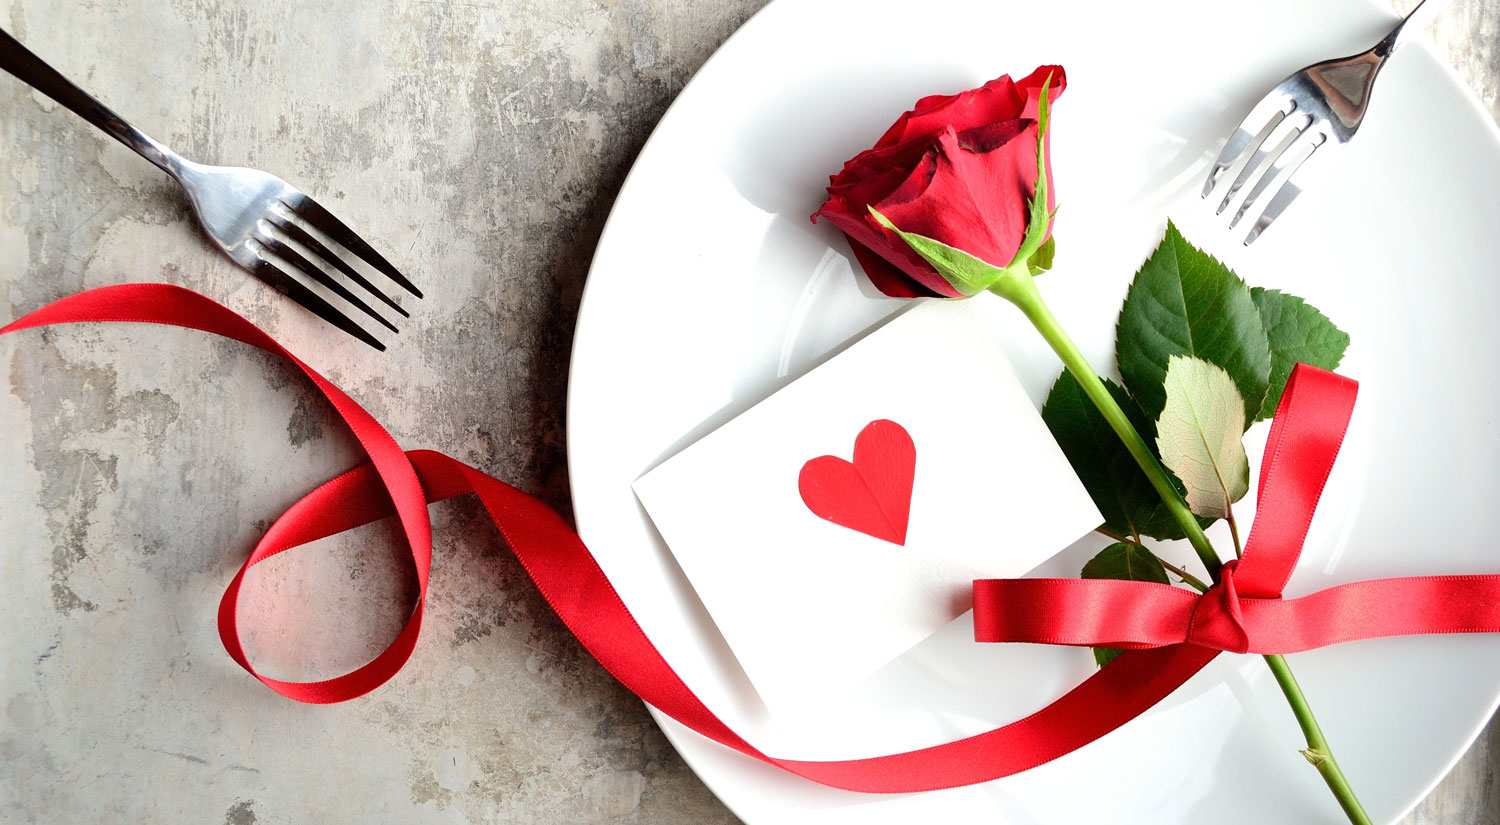 35 Romantic Dinner Recipes and Ideas for the Perfect Valentine’s Day